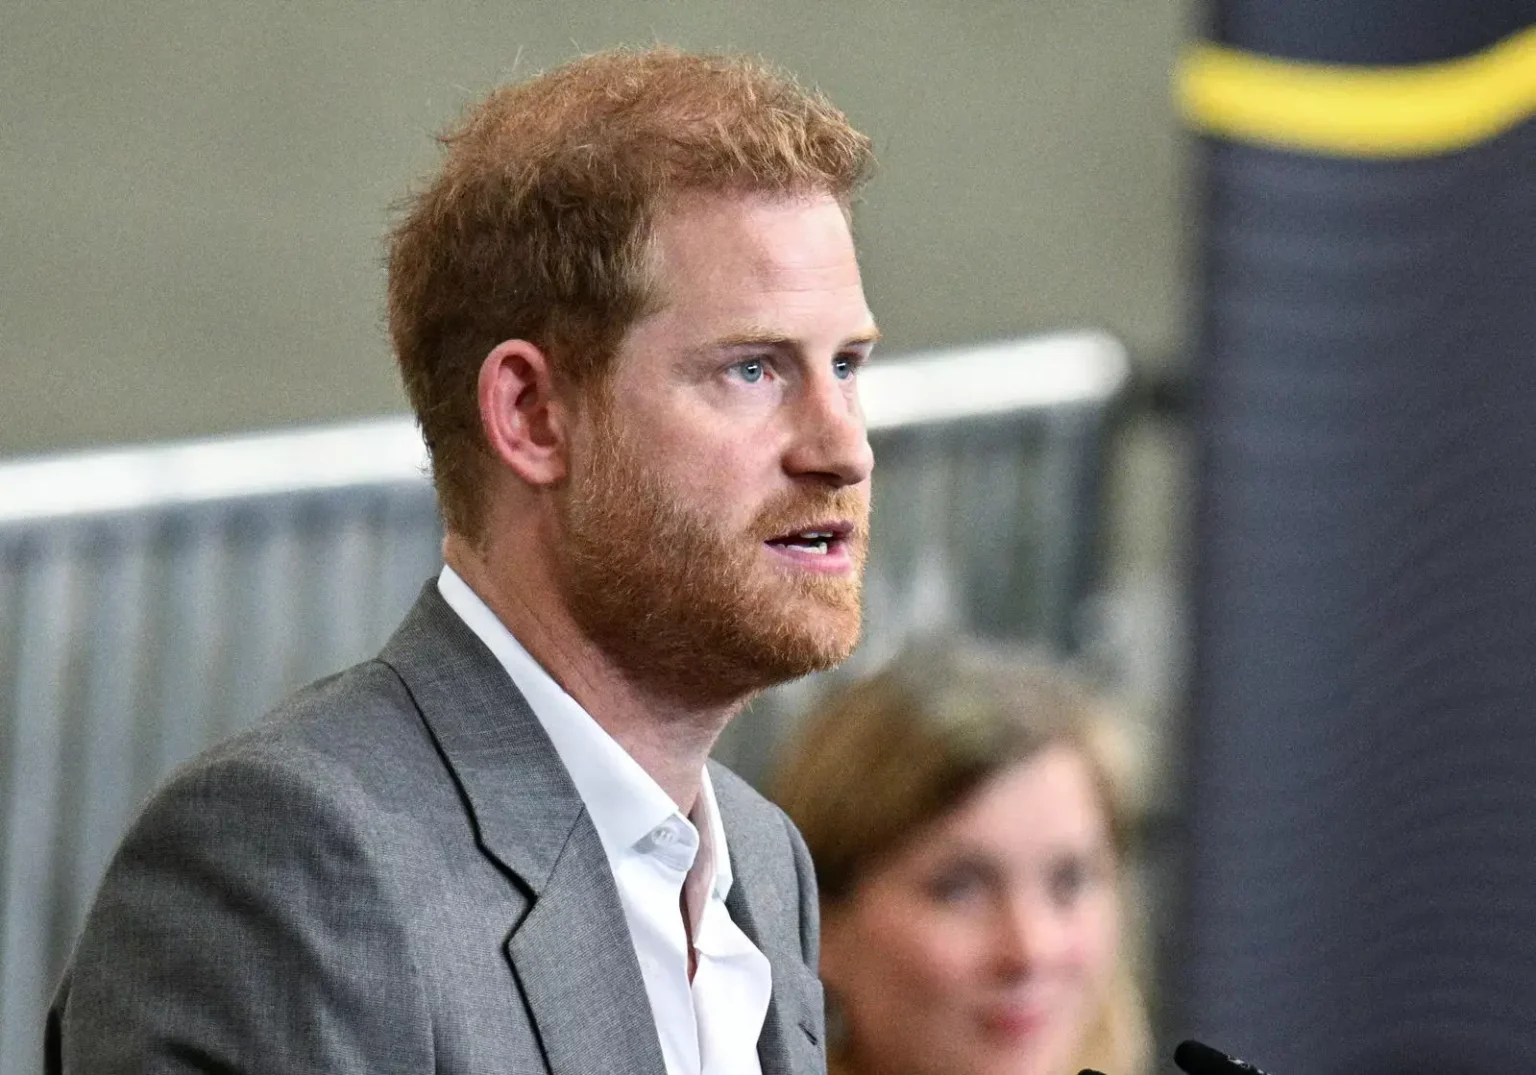 prince-harry-loses-uk-high-court-challenge-over-the-loss-of-personal-security-protection